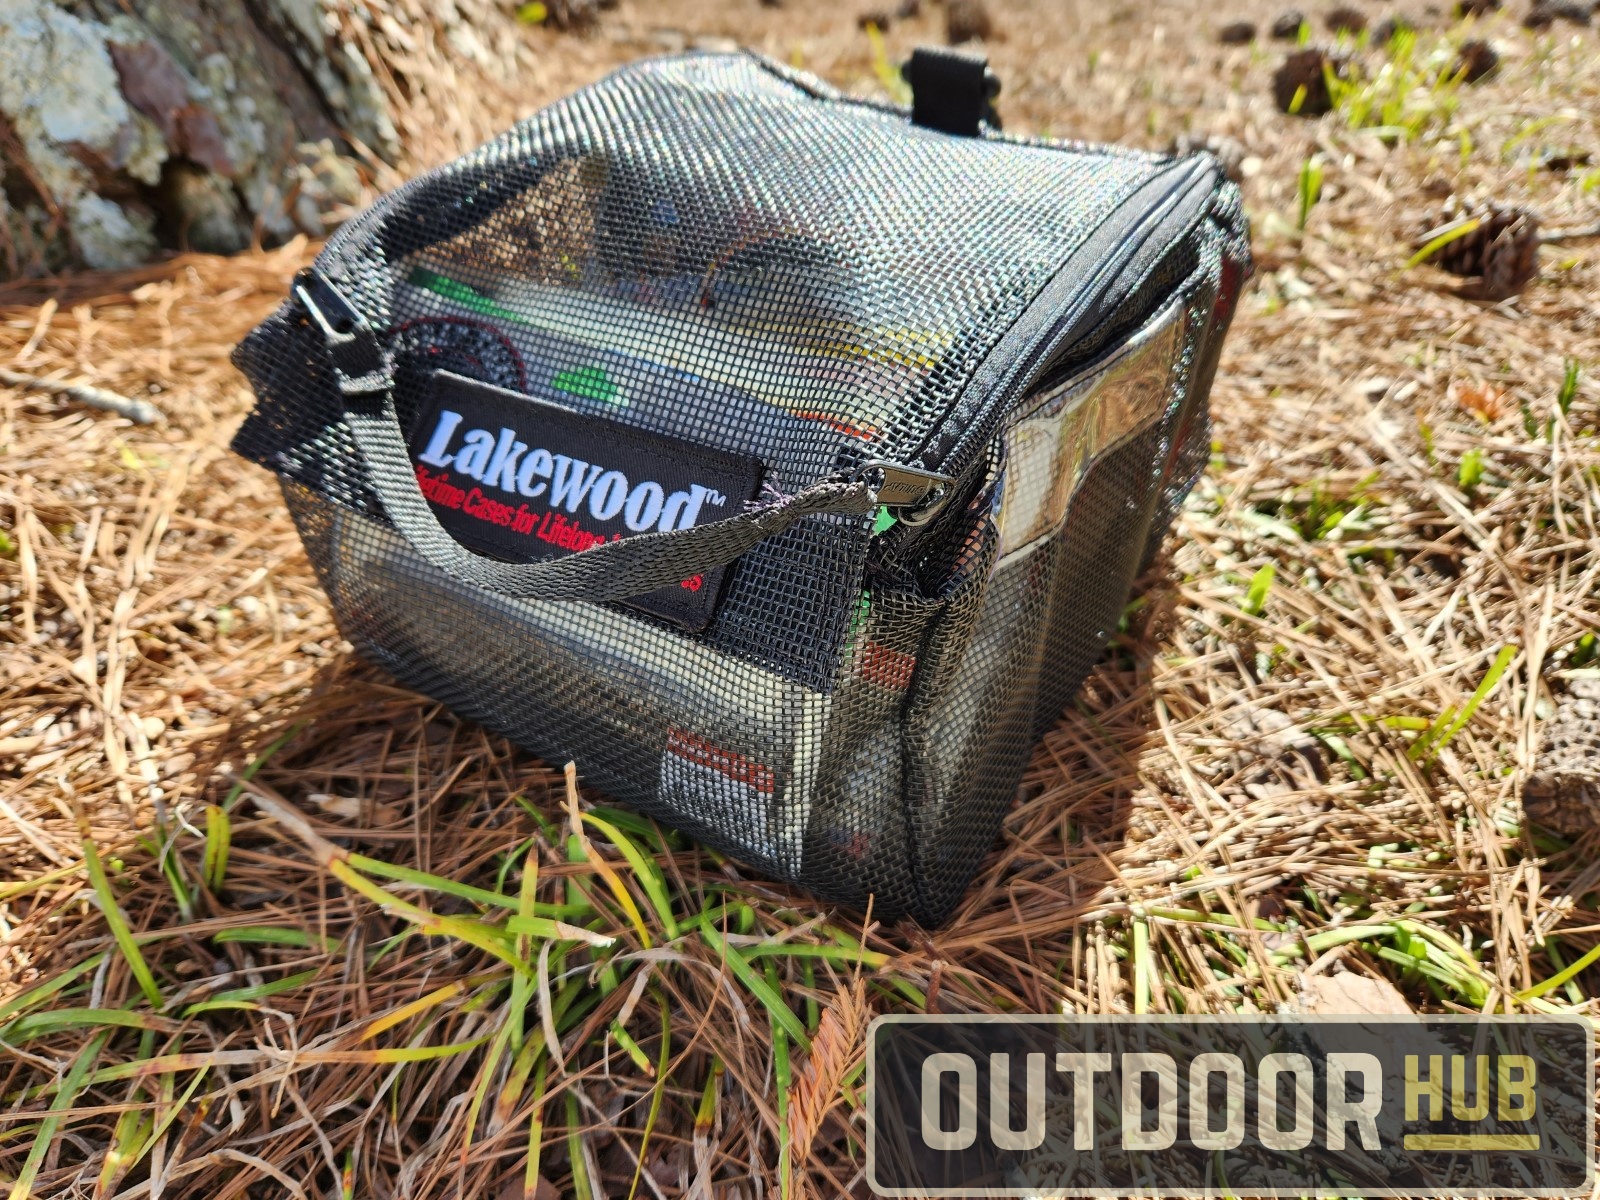 OHUB Review: Lakewood Billfold – Storage Solution for Baits